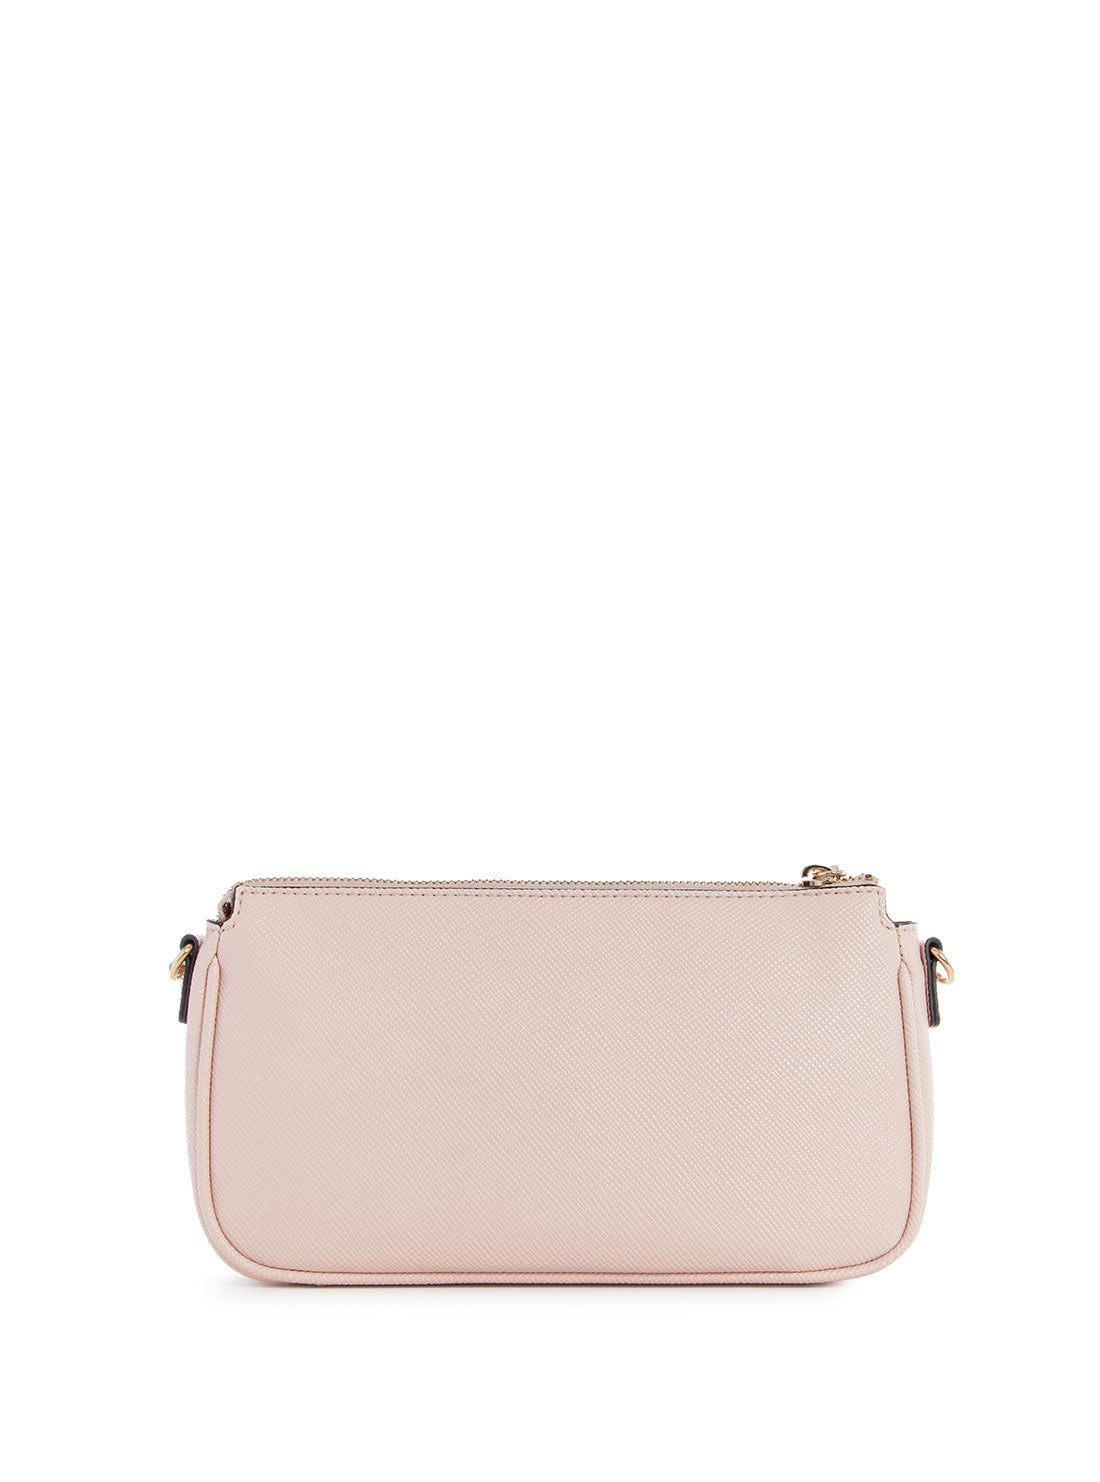 GUESS Pink Noelle Pouch Crossbody Bag back view